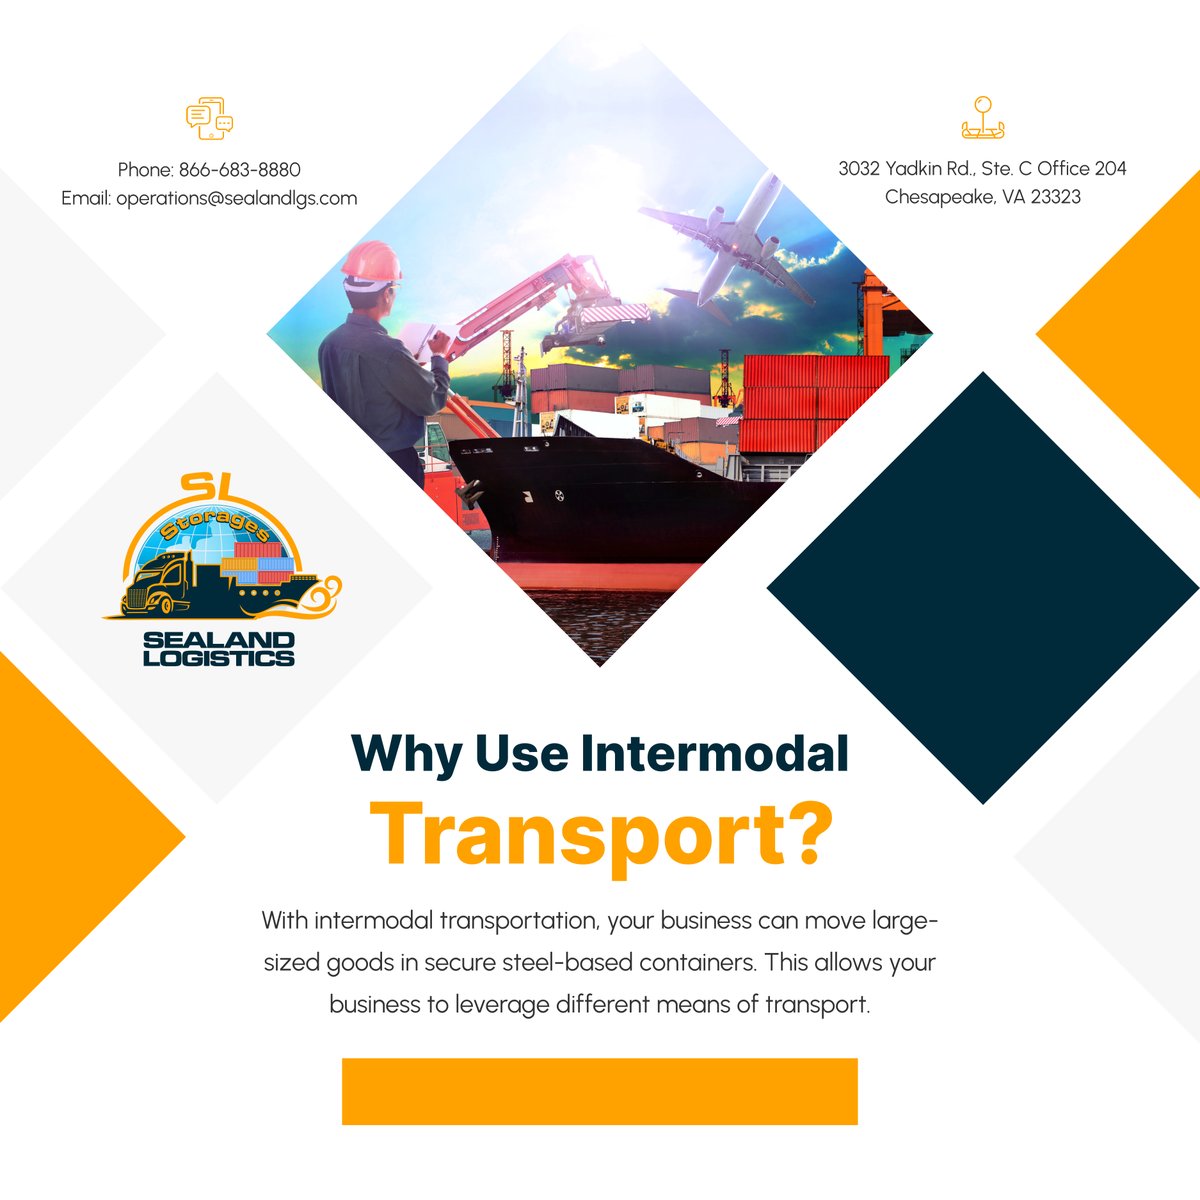 Intermodal transport is often considered the backbone of the logistics industry as it offers rapid service, lower costs, increased capacity, and enhanced security for precious cargo.

#ChesapeakeVA #FreightServices #IntermodalTransport #LogisticsIndustry #IncreasedCapacity